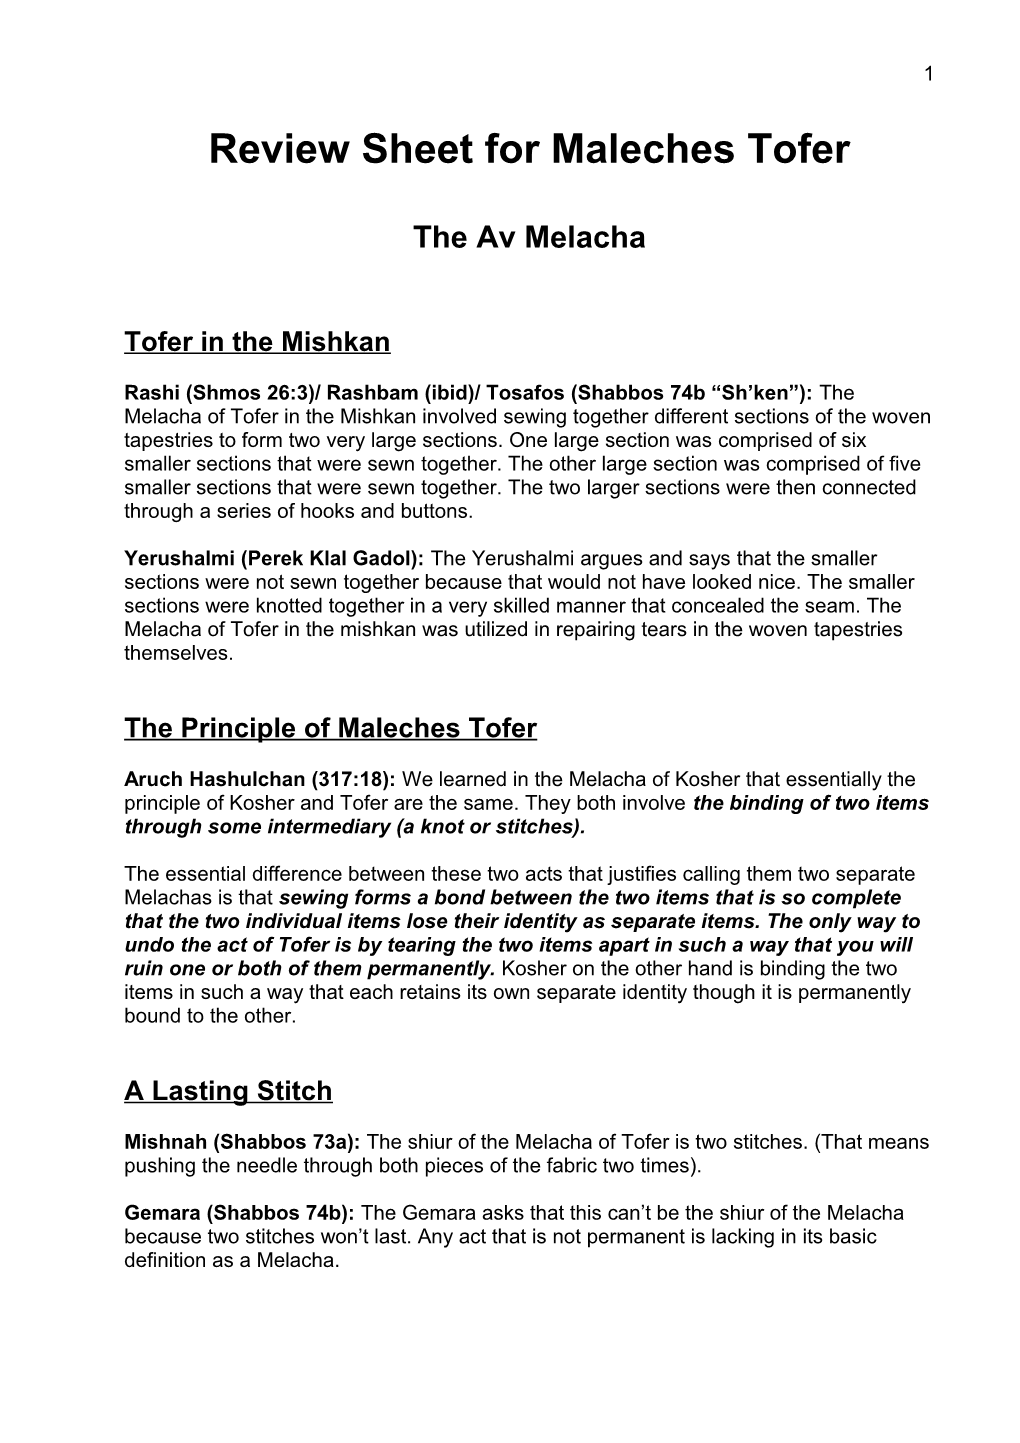 Review Sheet for Maleches Tofer